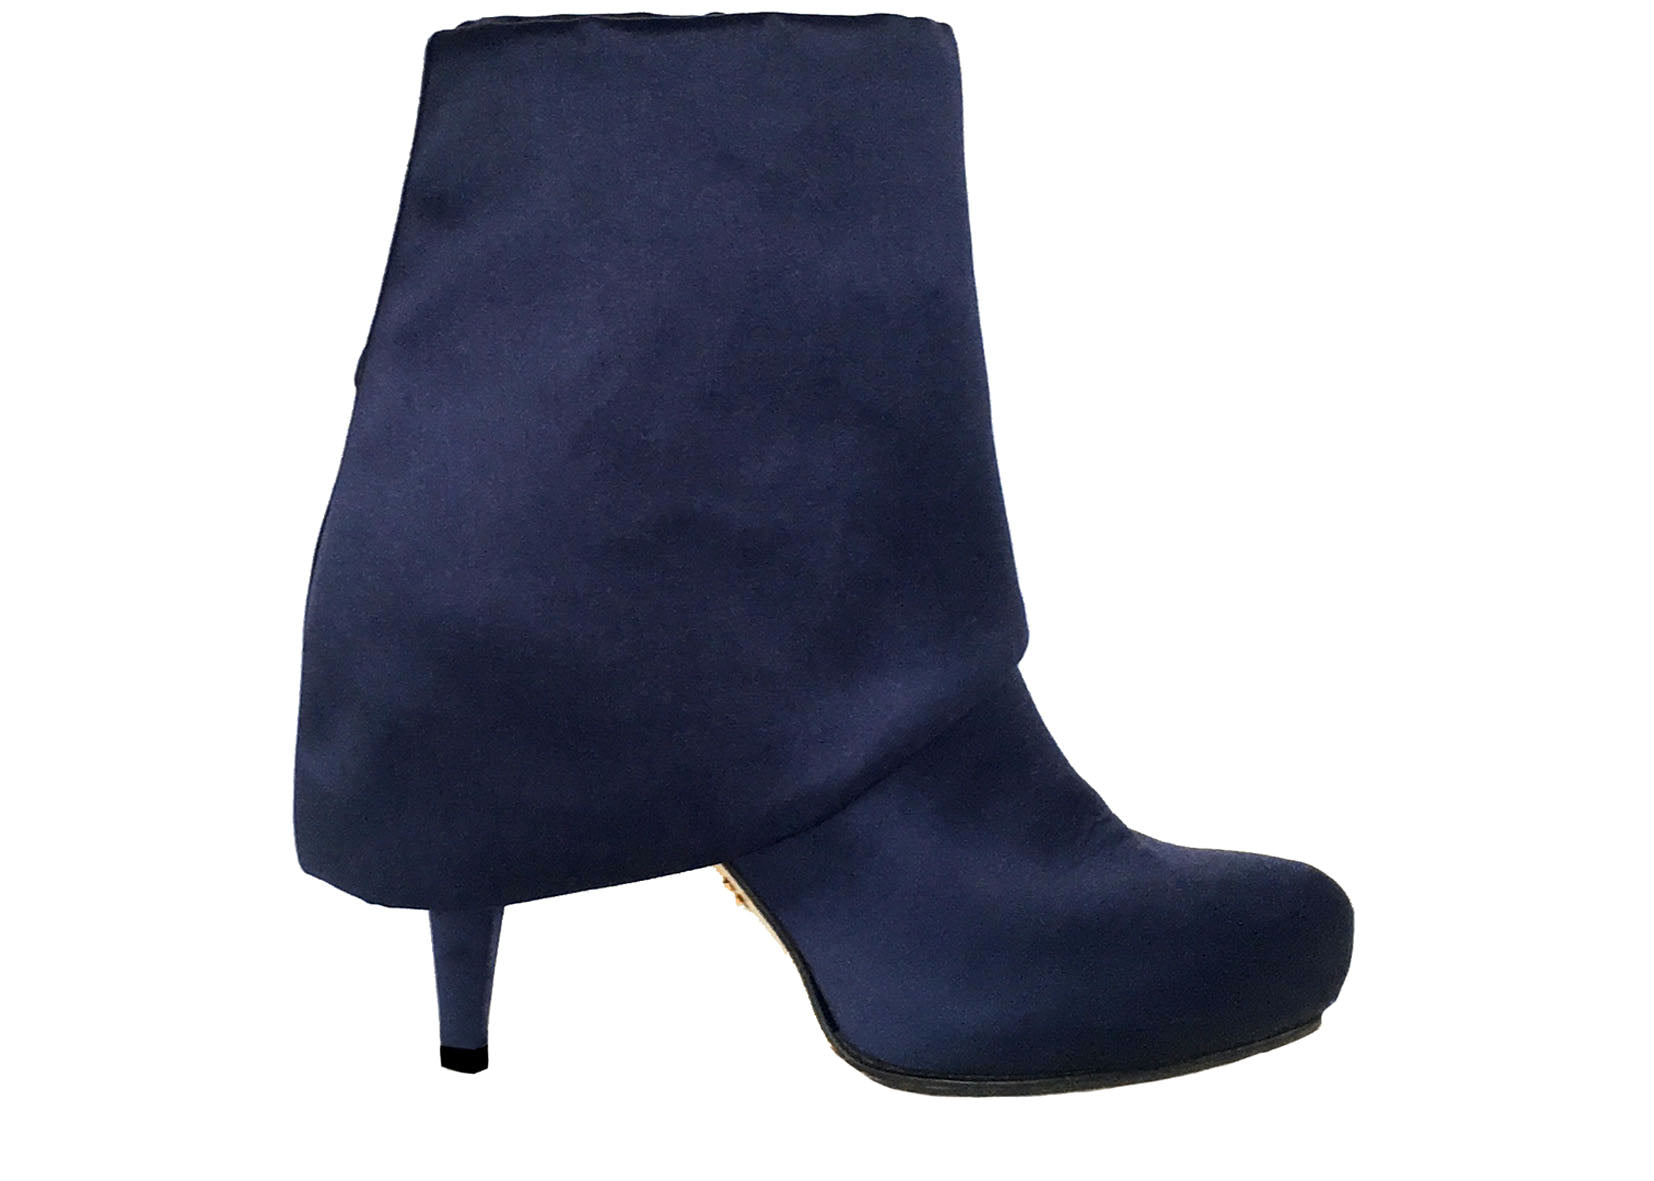 Chloe satin ankle boots, luxury vegan boots, by designer Ivana Basilotta for No One’s Skin